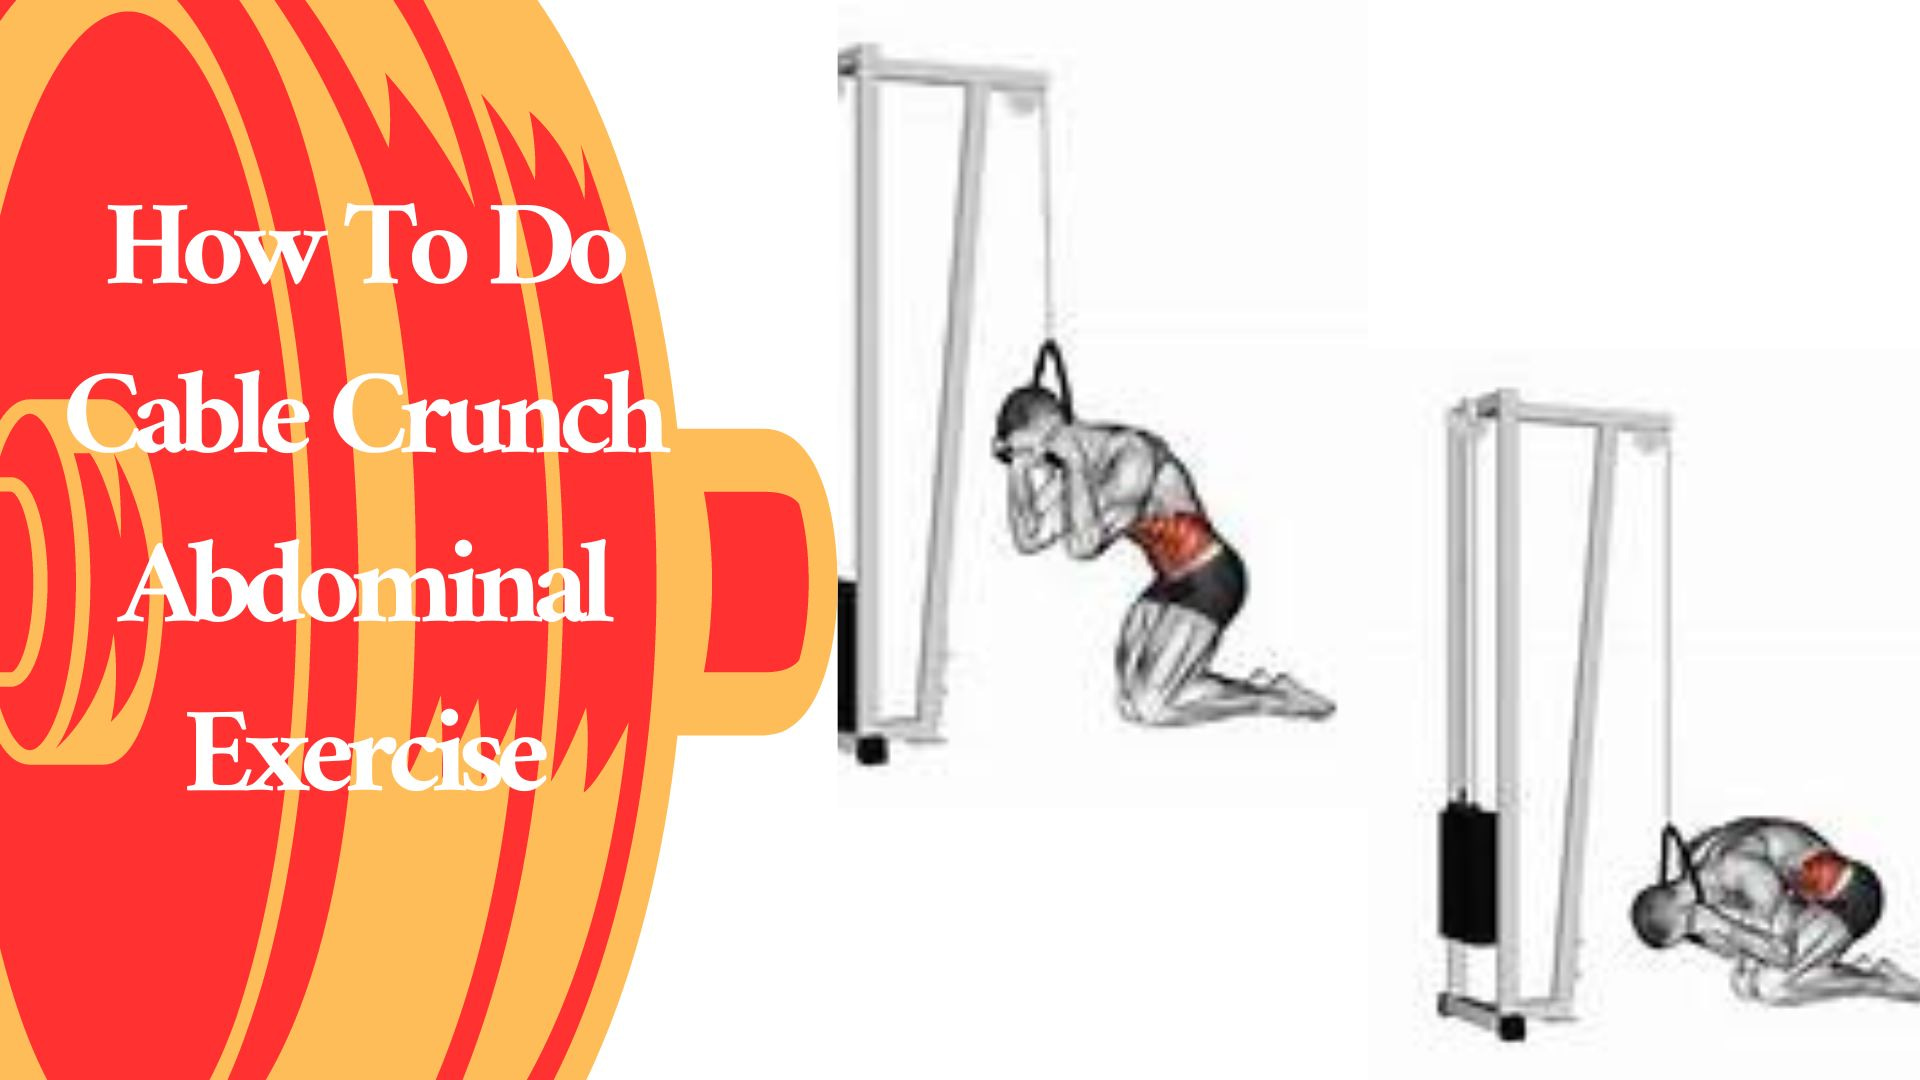 How To Do Cable Crunch Abdominal Exercise